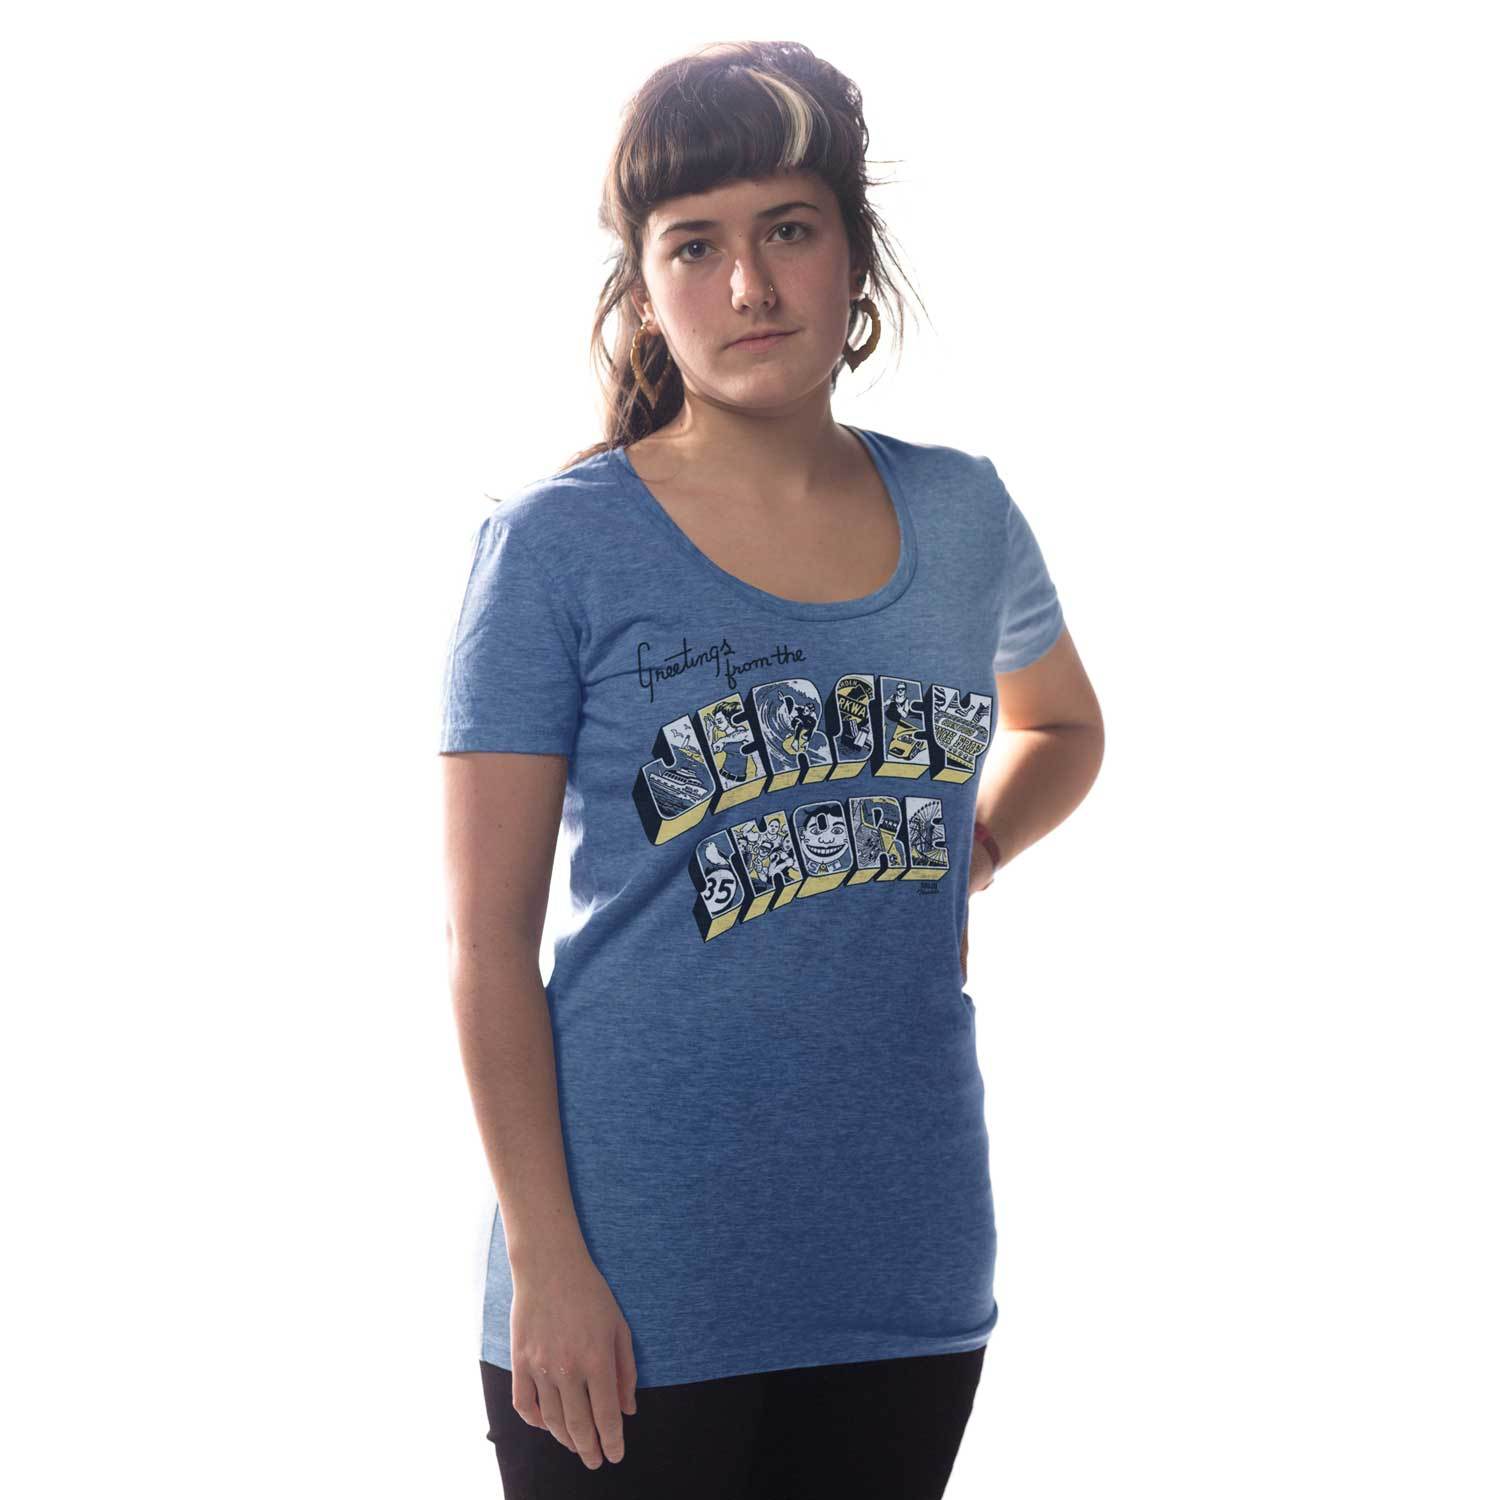 Choulous79 Sports and Fitness Design Vintage Women's T-Shirt